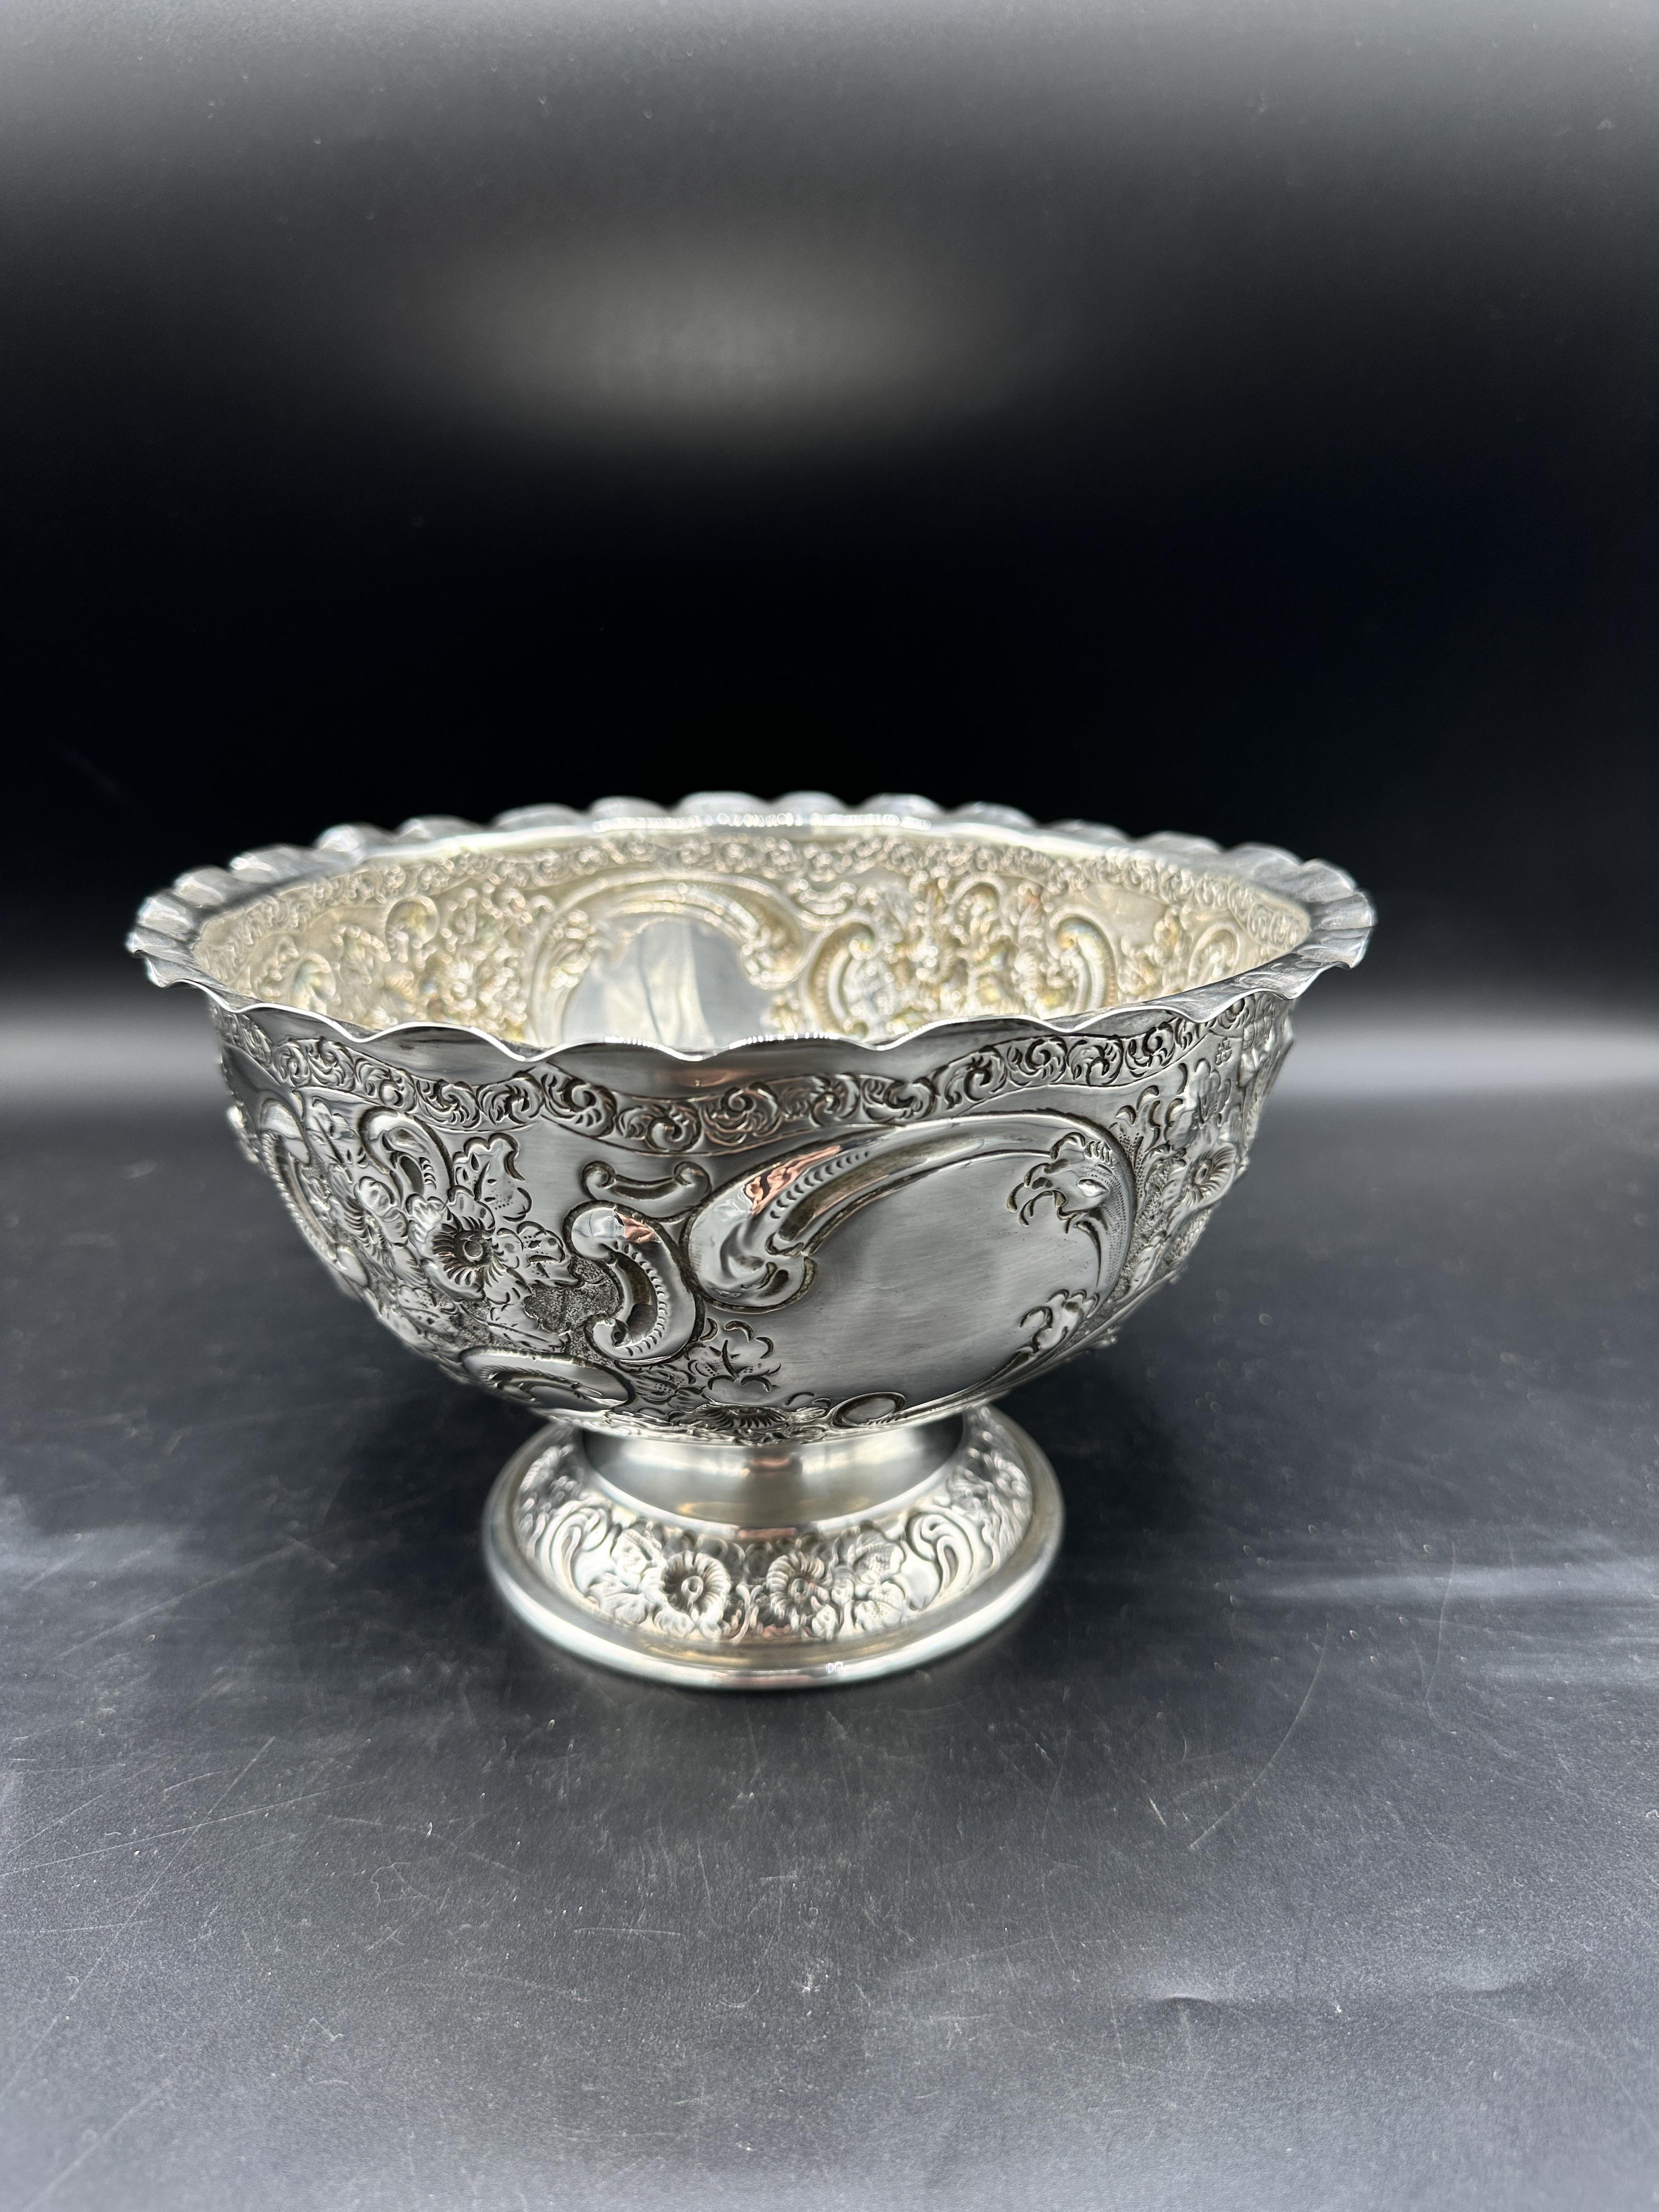 Silver repousse bowl - Image 3 of 5